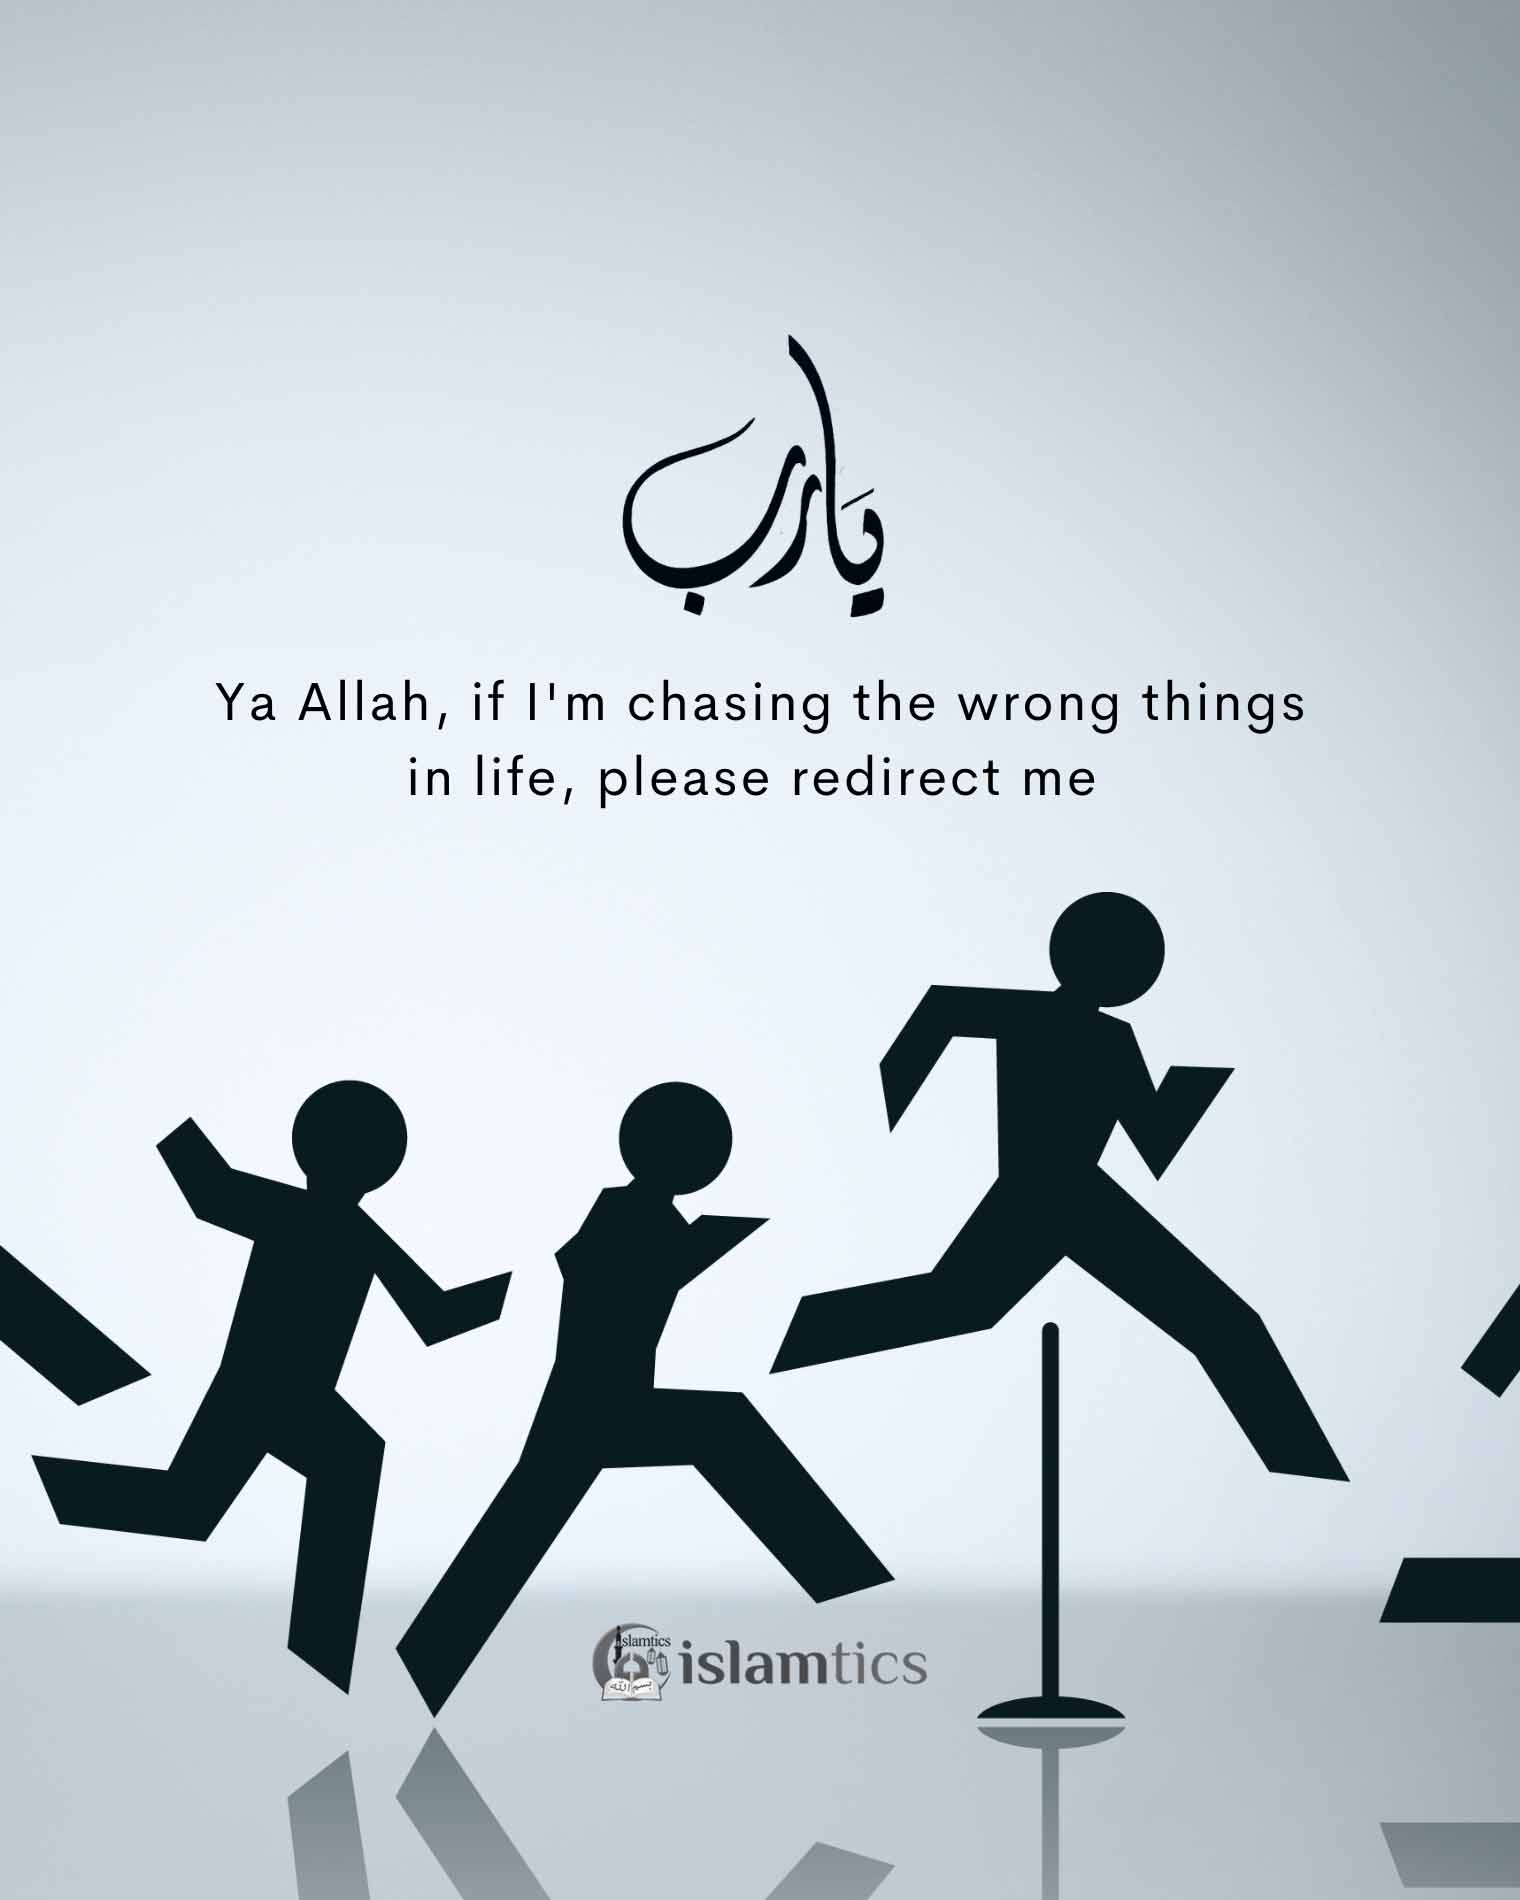 Ya Allah, if I’m chasing the wrong things in life, please redirect me